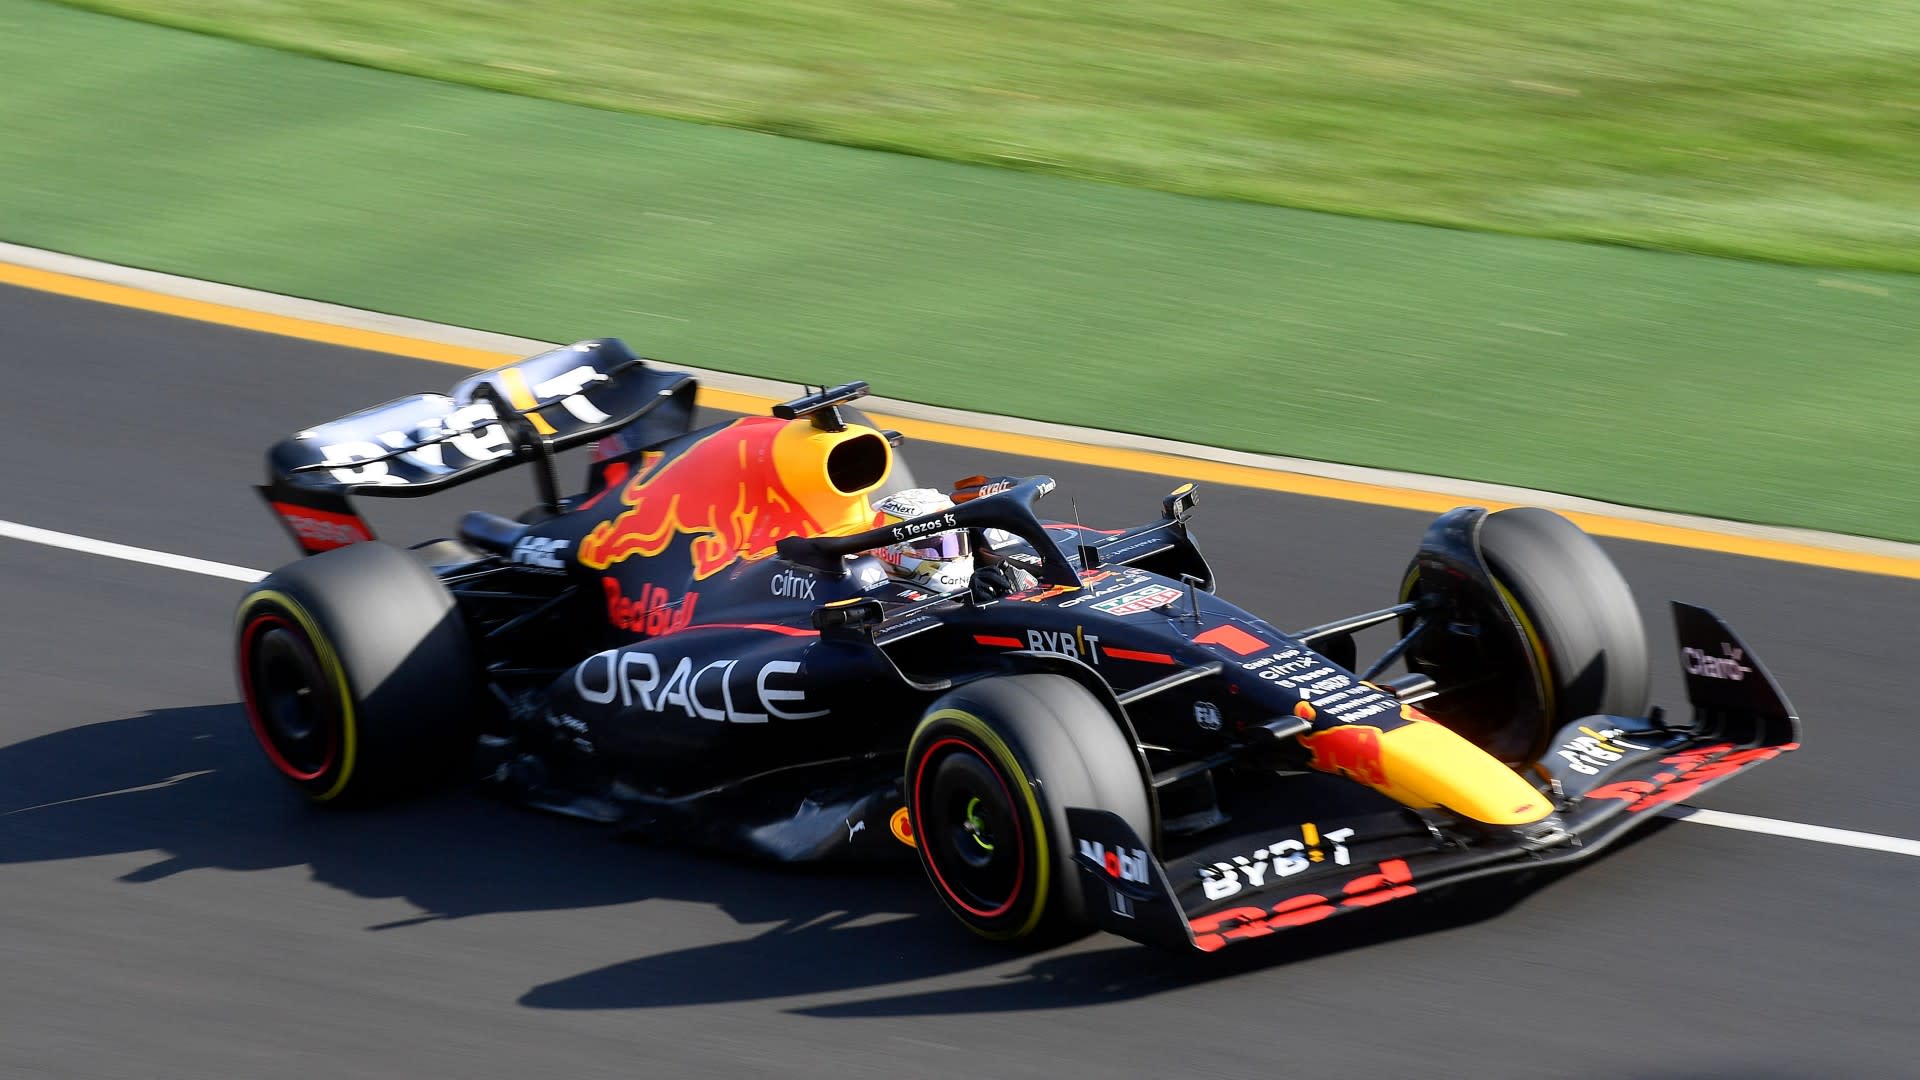 First Red Bull Powertrains to run end 2022, says Horner | Formula 1®